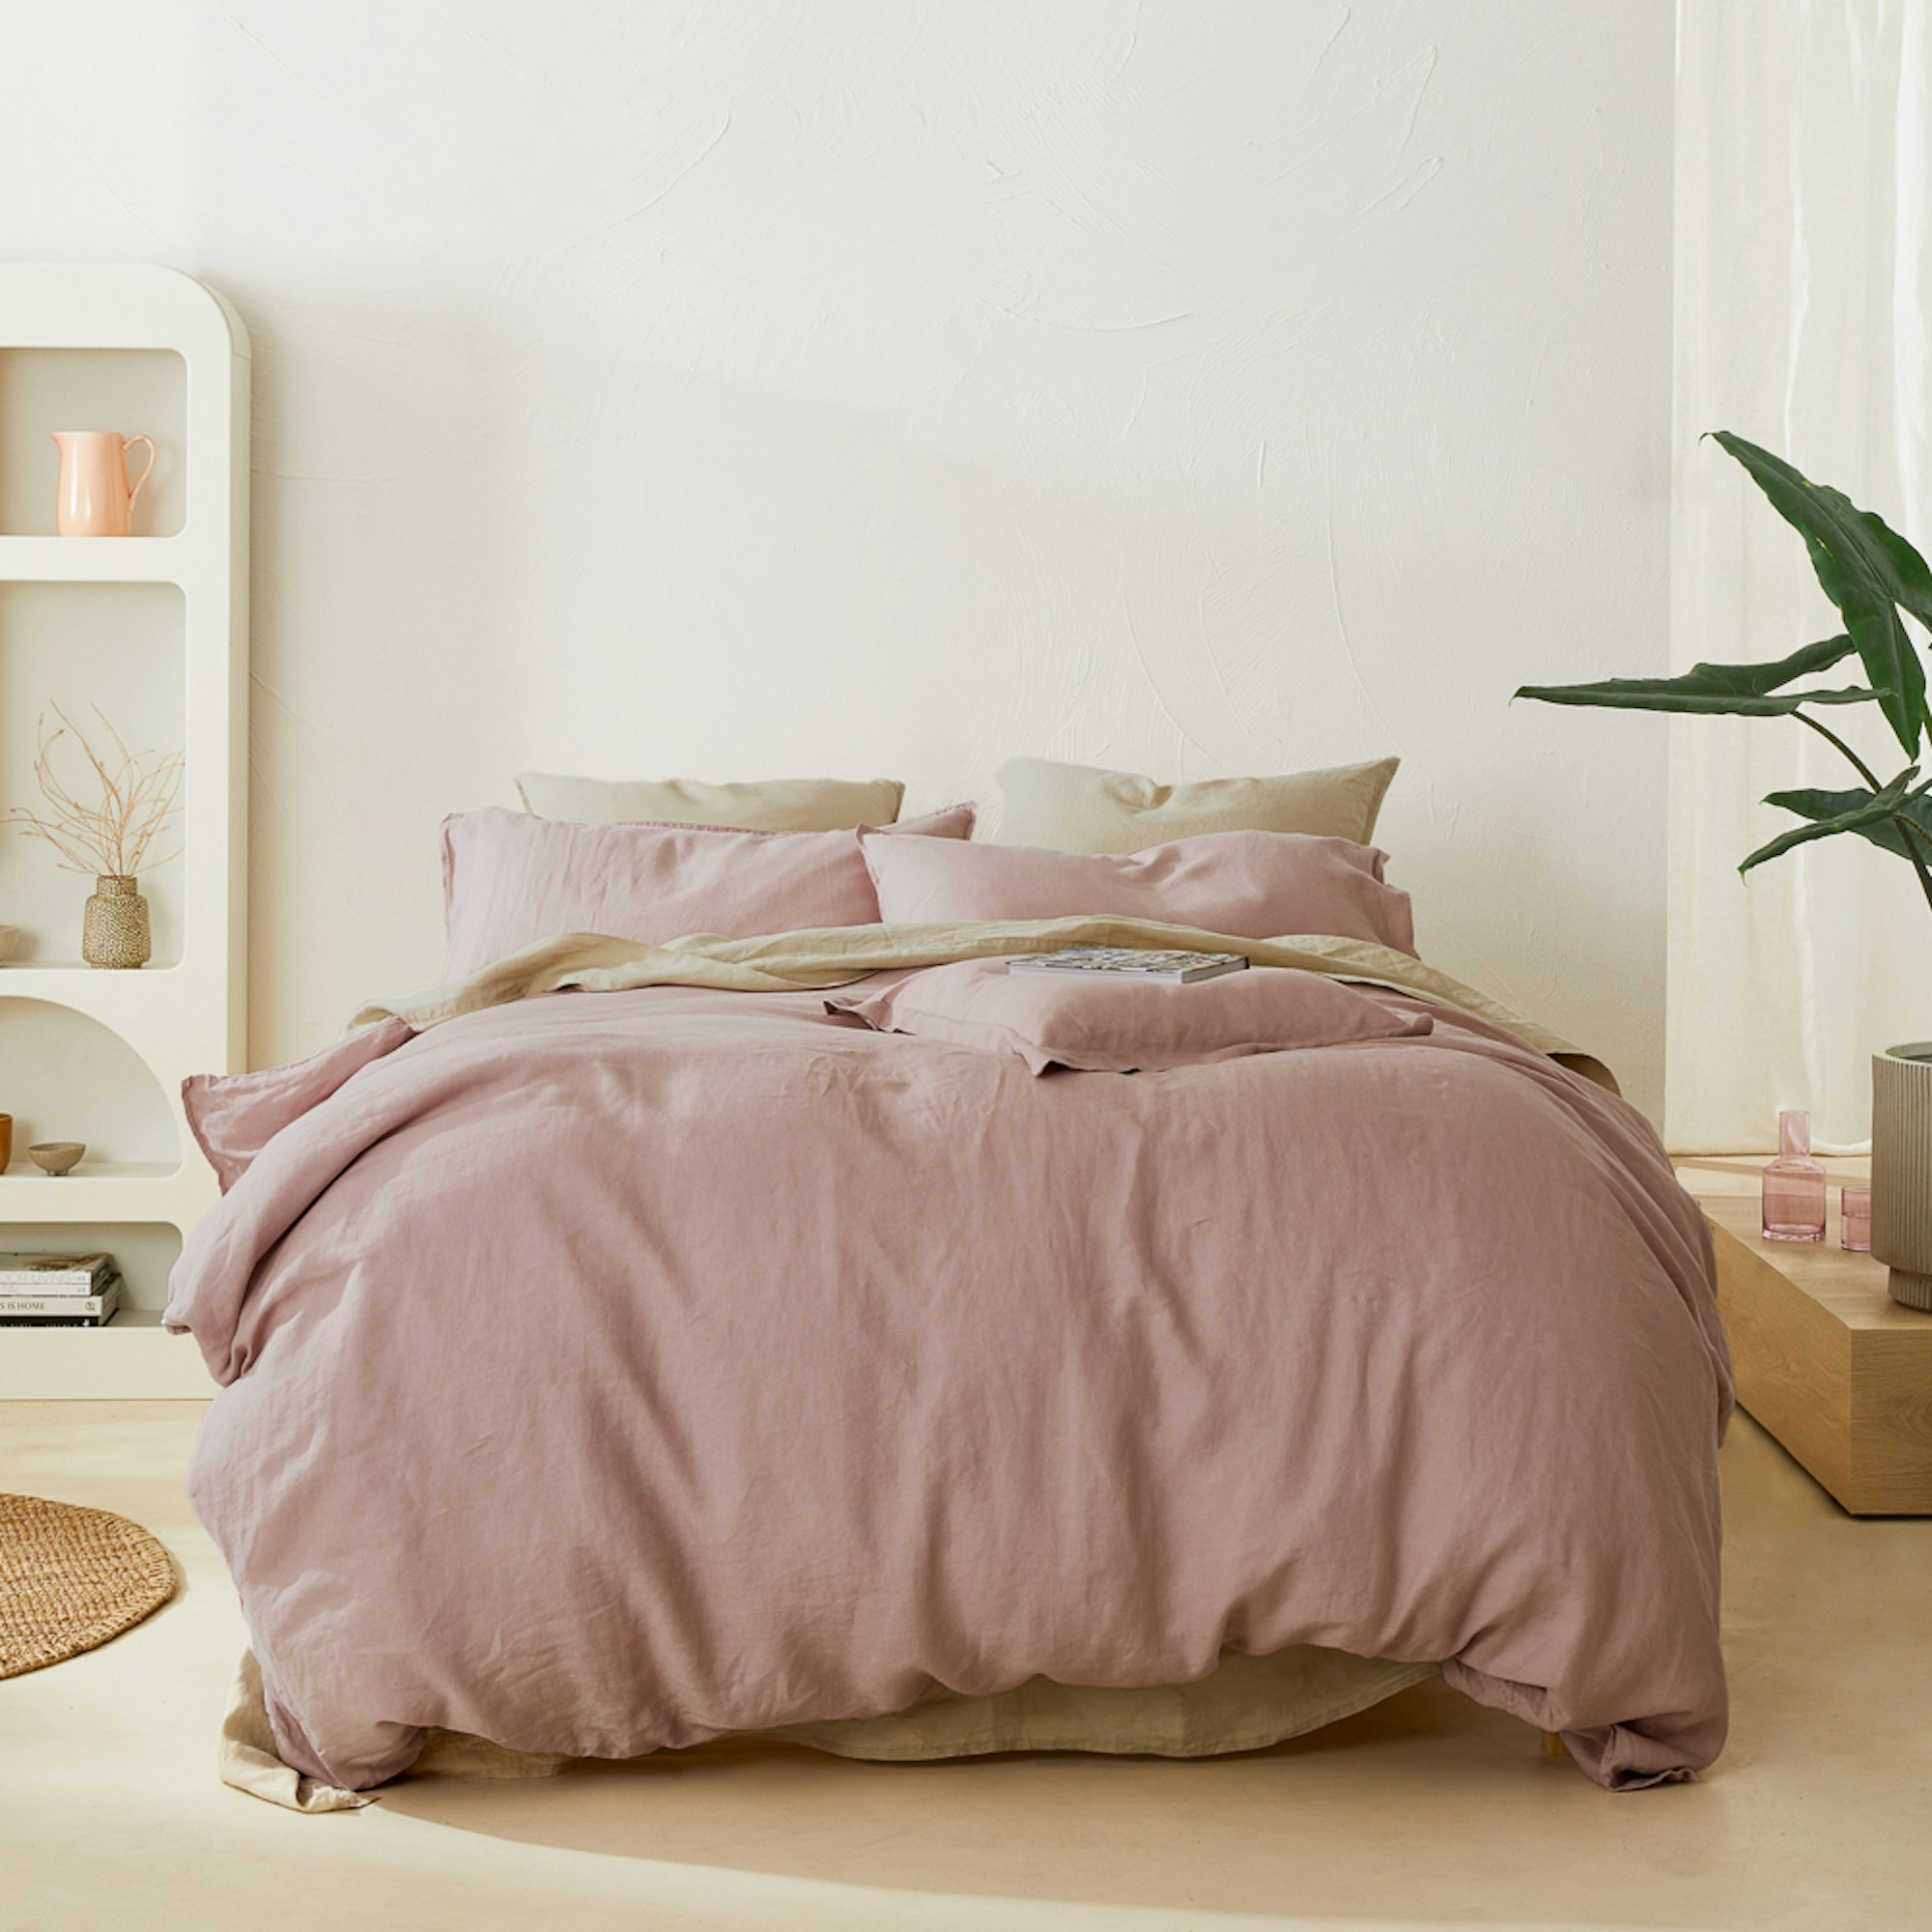 Complete bedroom setting with pink linen quilt cover and natural linen sheets